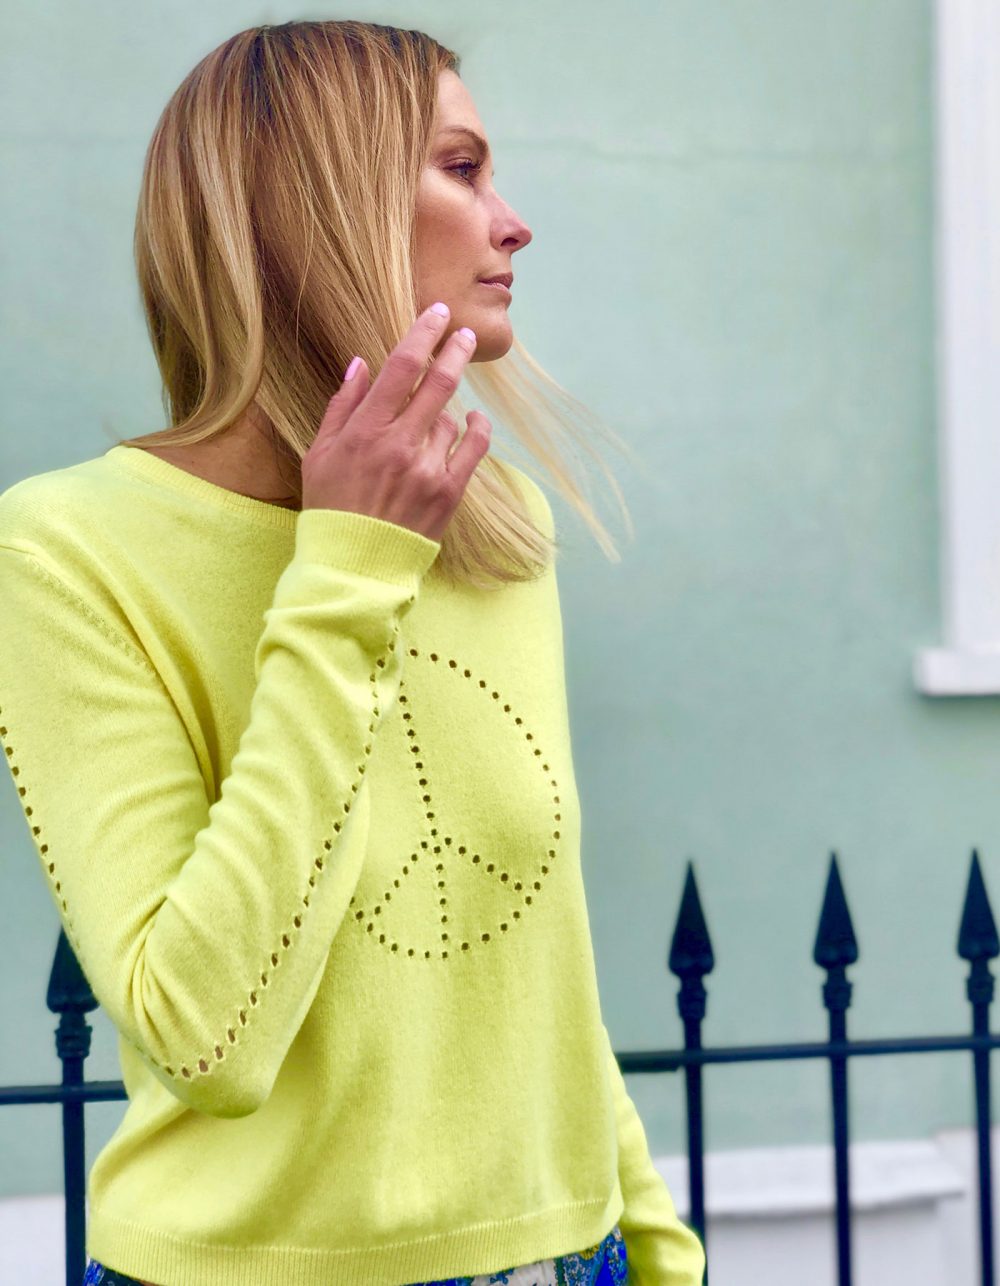 Picture of a model standing by railings in designer cashmere knitwear, the yellow malin darlin Peace cashmere jumper.